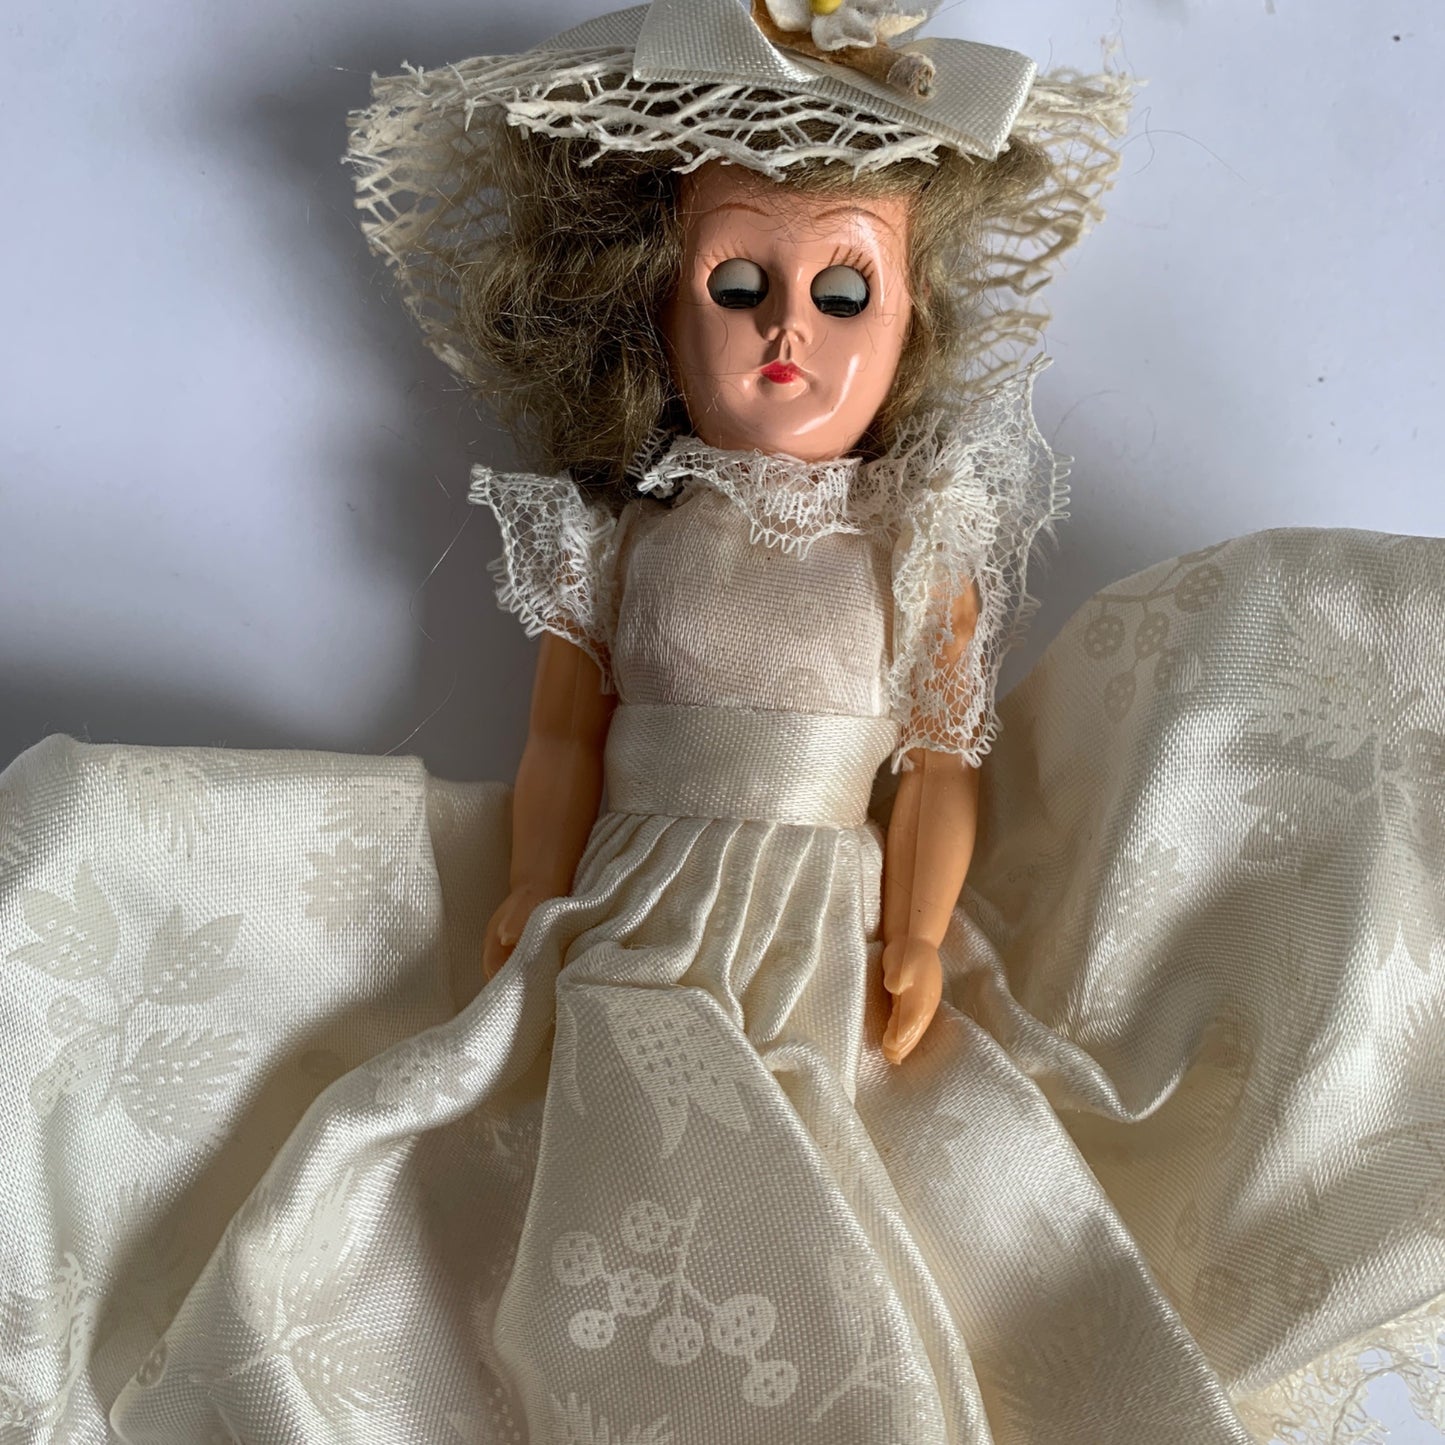 Vintage Hard Plastic Doll White Dress from Candy Box